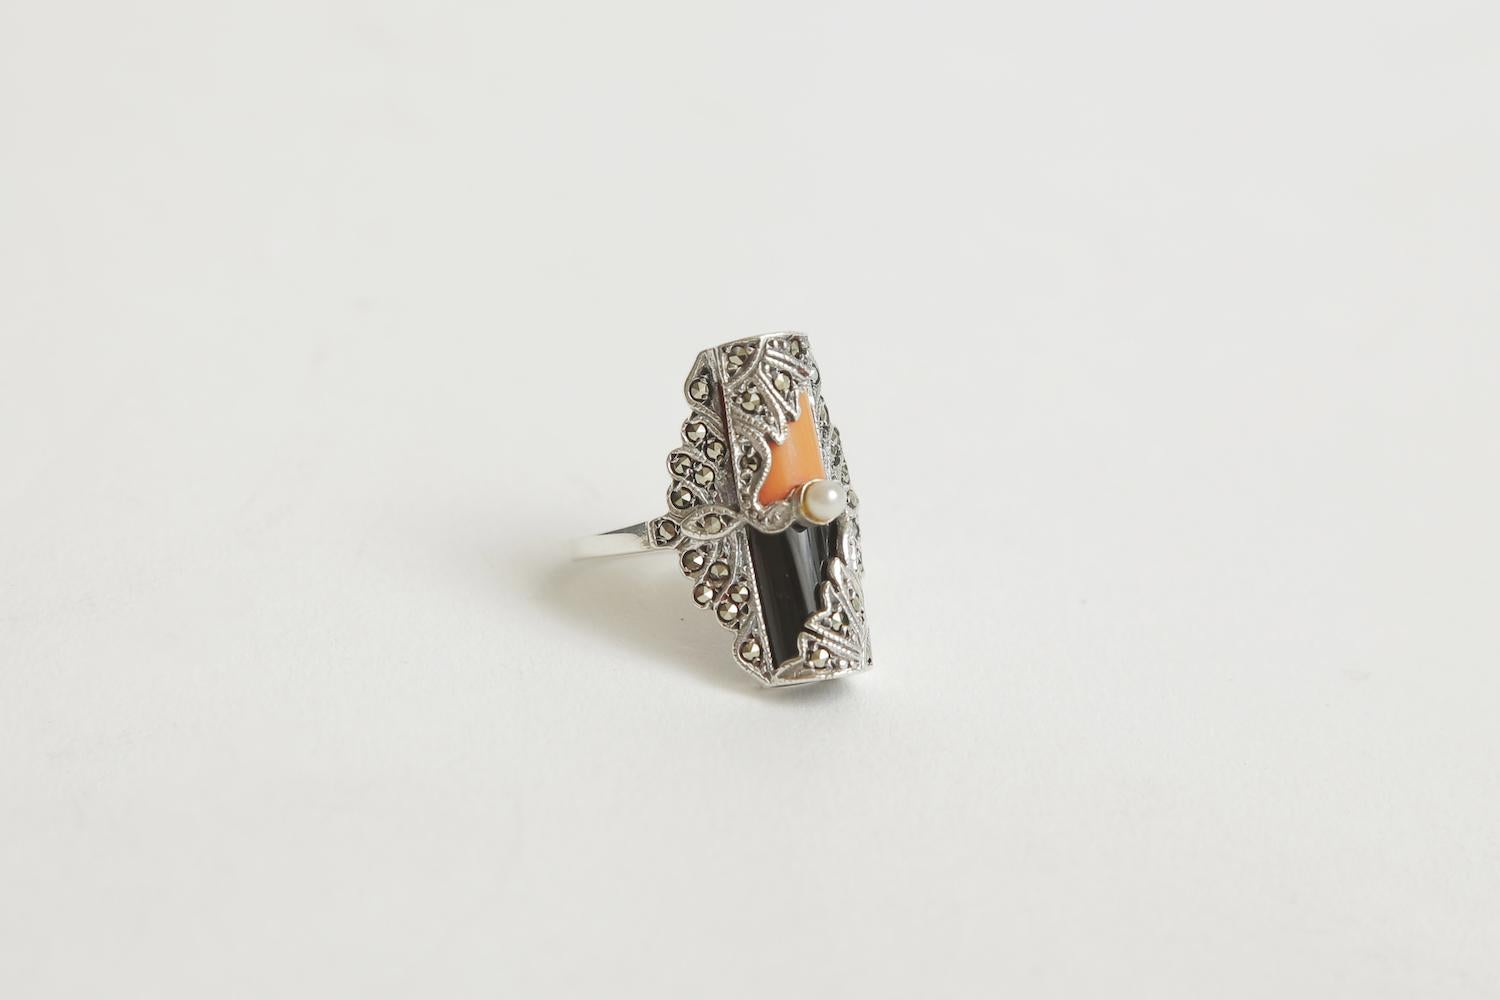 This lovely art deco ring is sterling silver and the design is set with surround marquisettes with angled coral and onyx and topped with a tiny tiny real pearl. It has a flair and is of the period. It is more elongated and slender on the finger.